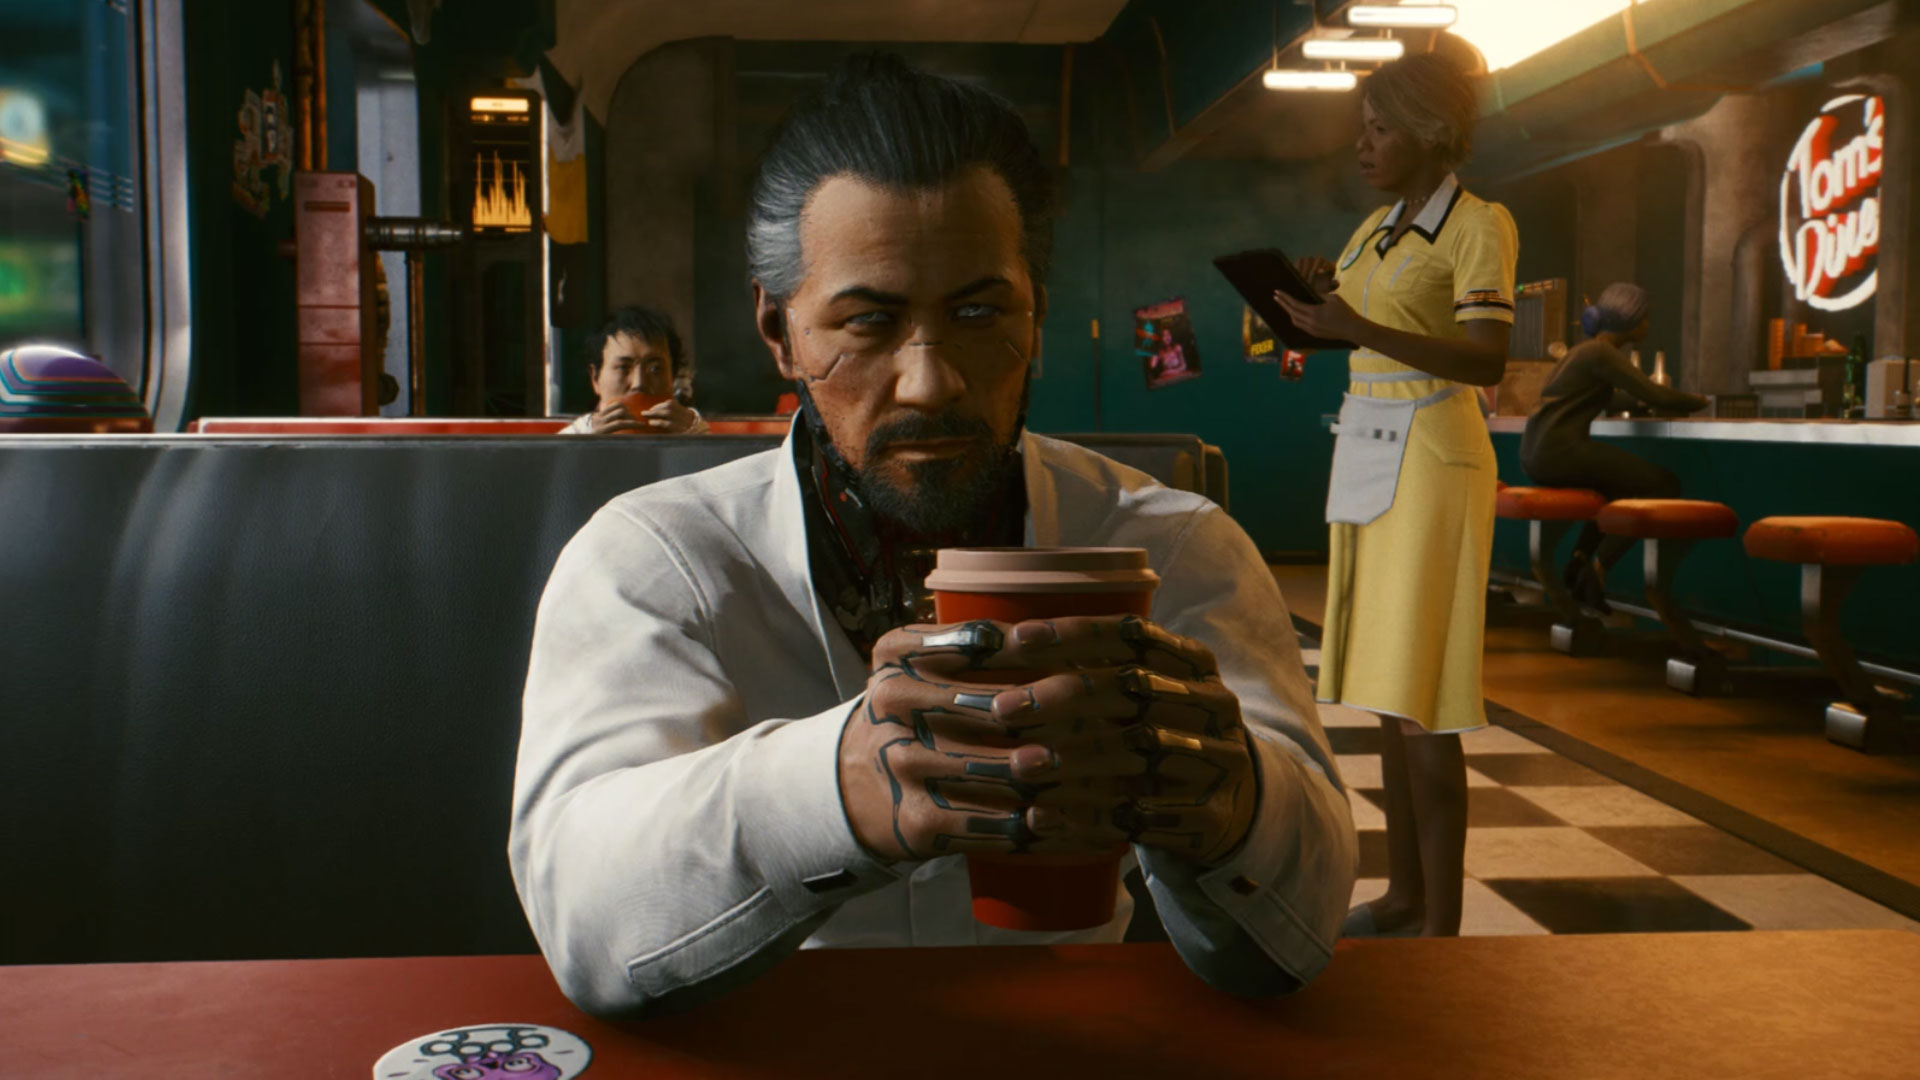 The PS5 runs Cyberpunk 2077 well enough for me to make the perfect man,  Digital News - AsiaOne